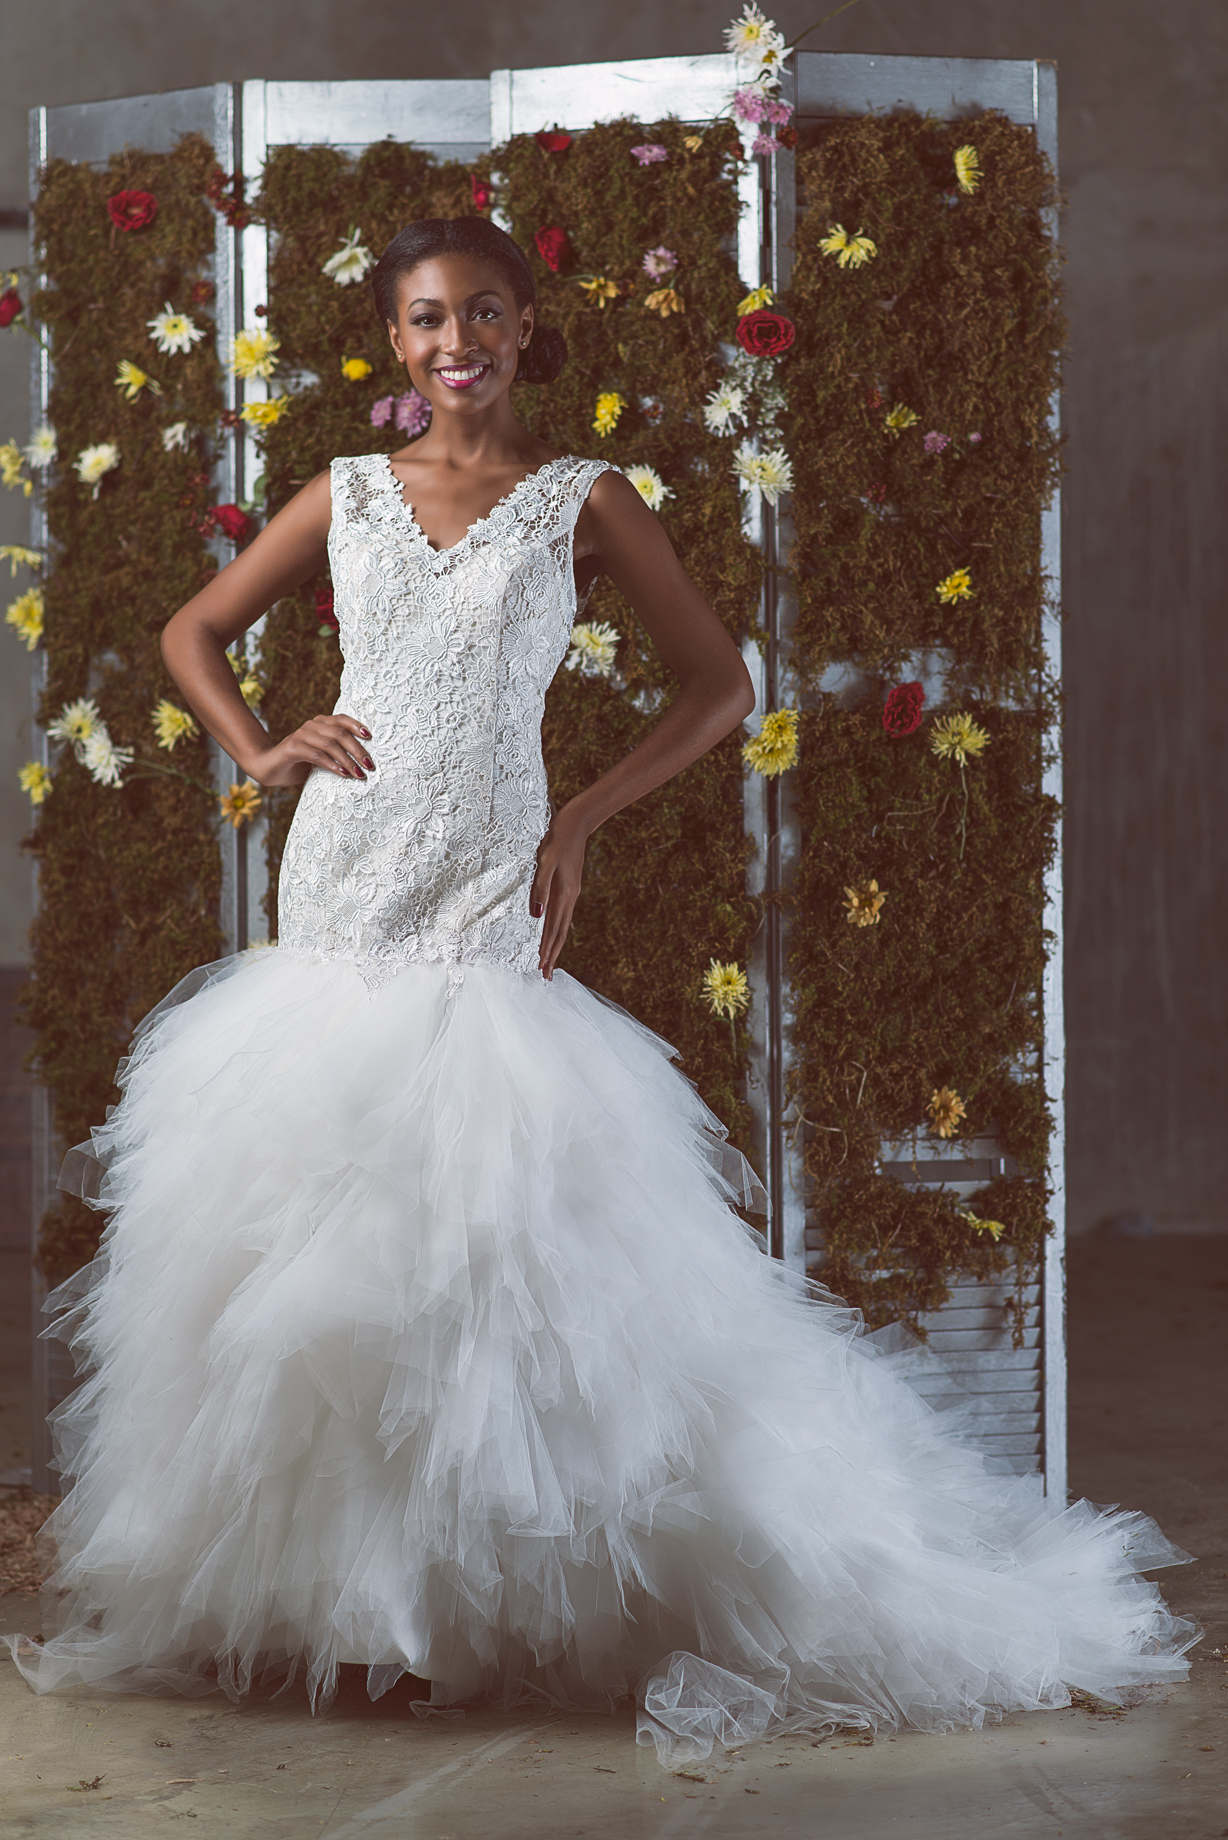 MeJeanne Couture Custom Wedding Gown Collection